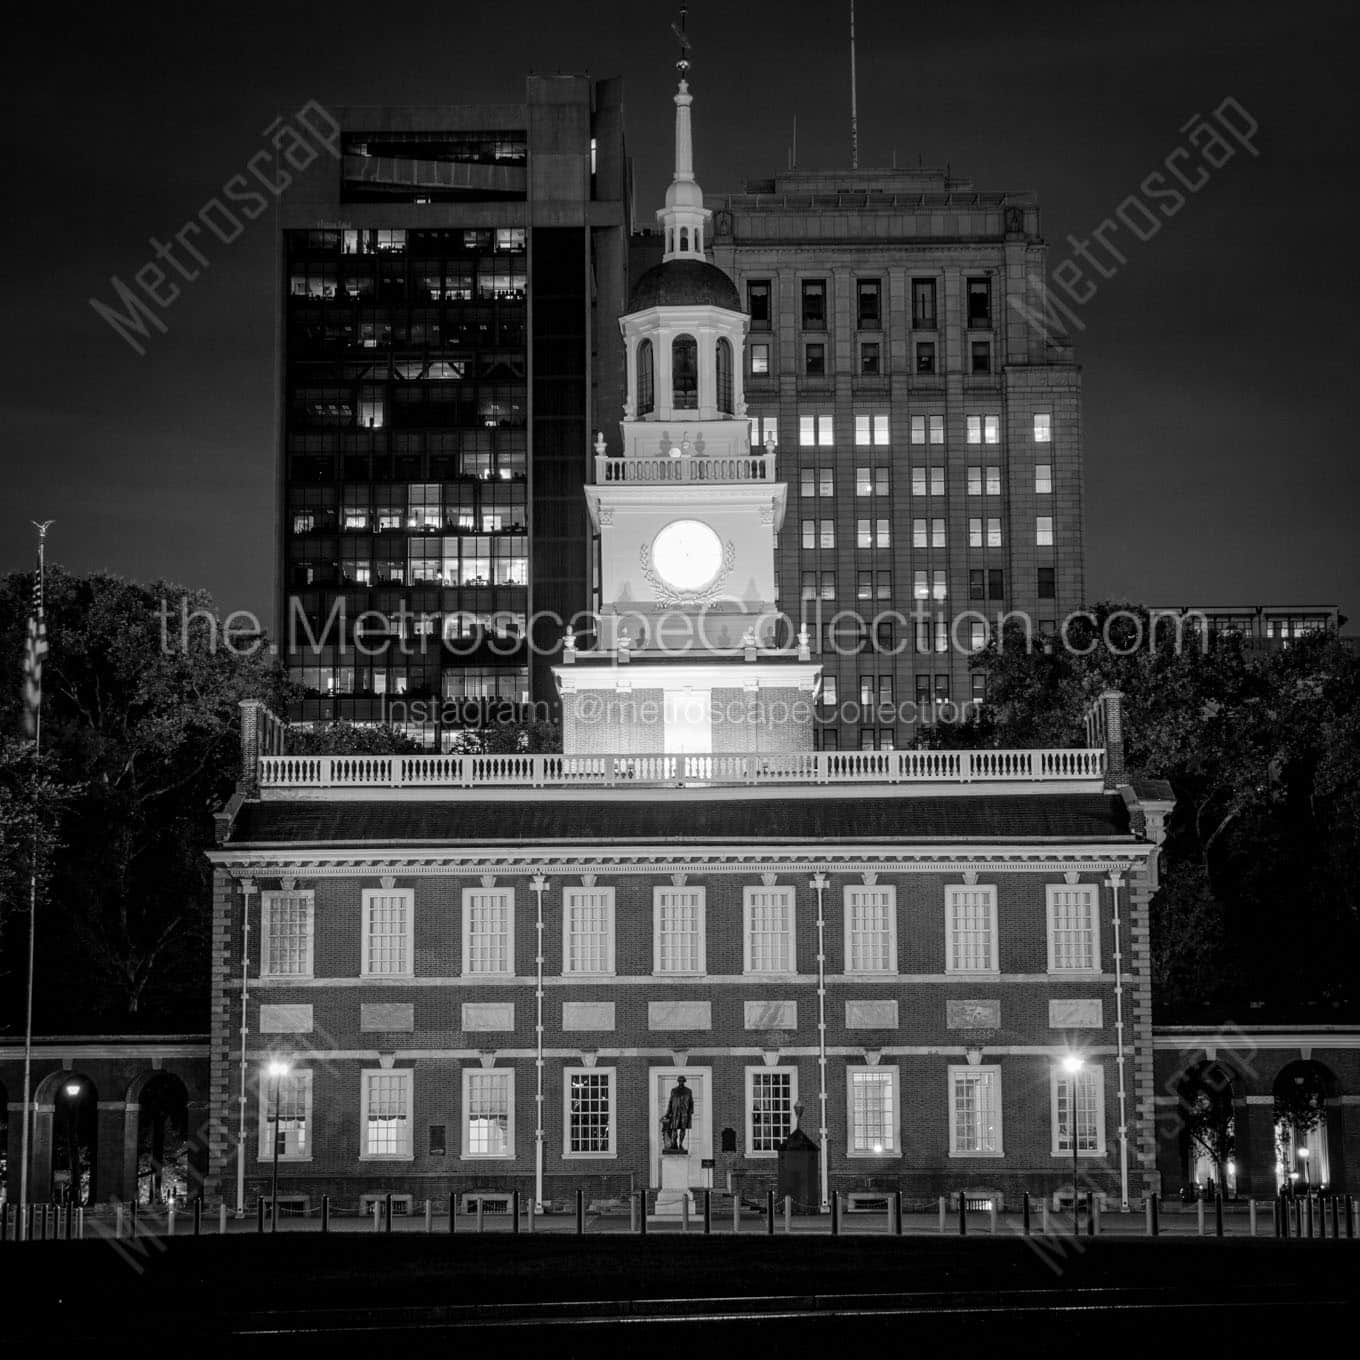 independence hall at night Black & White Office Art